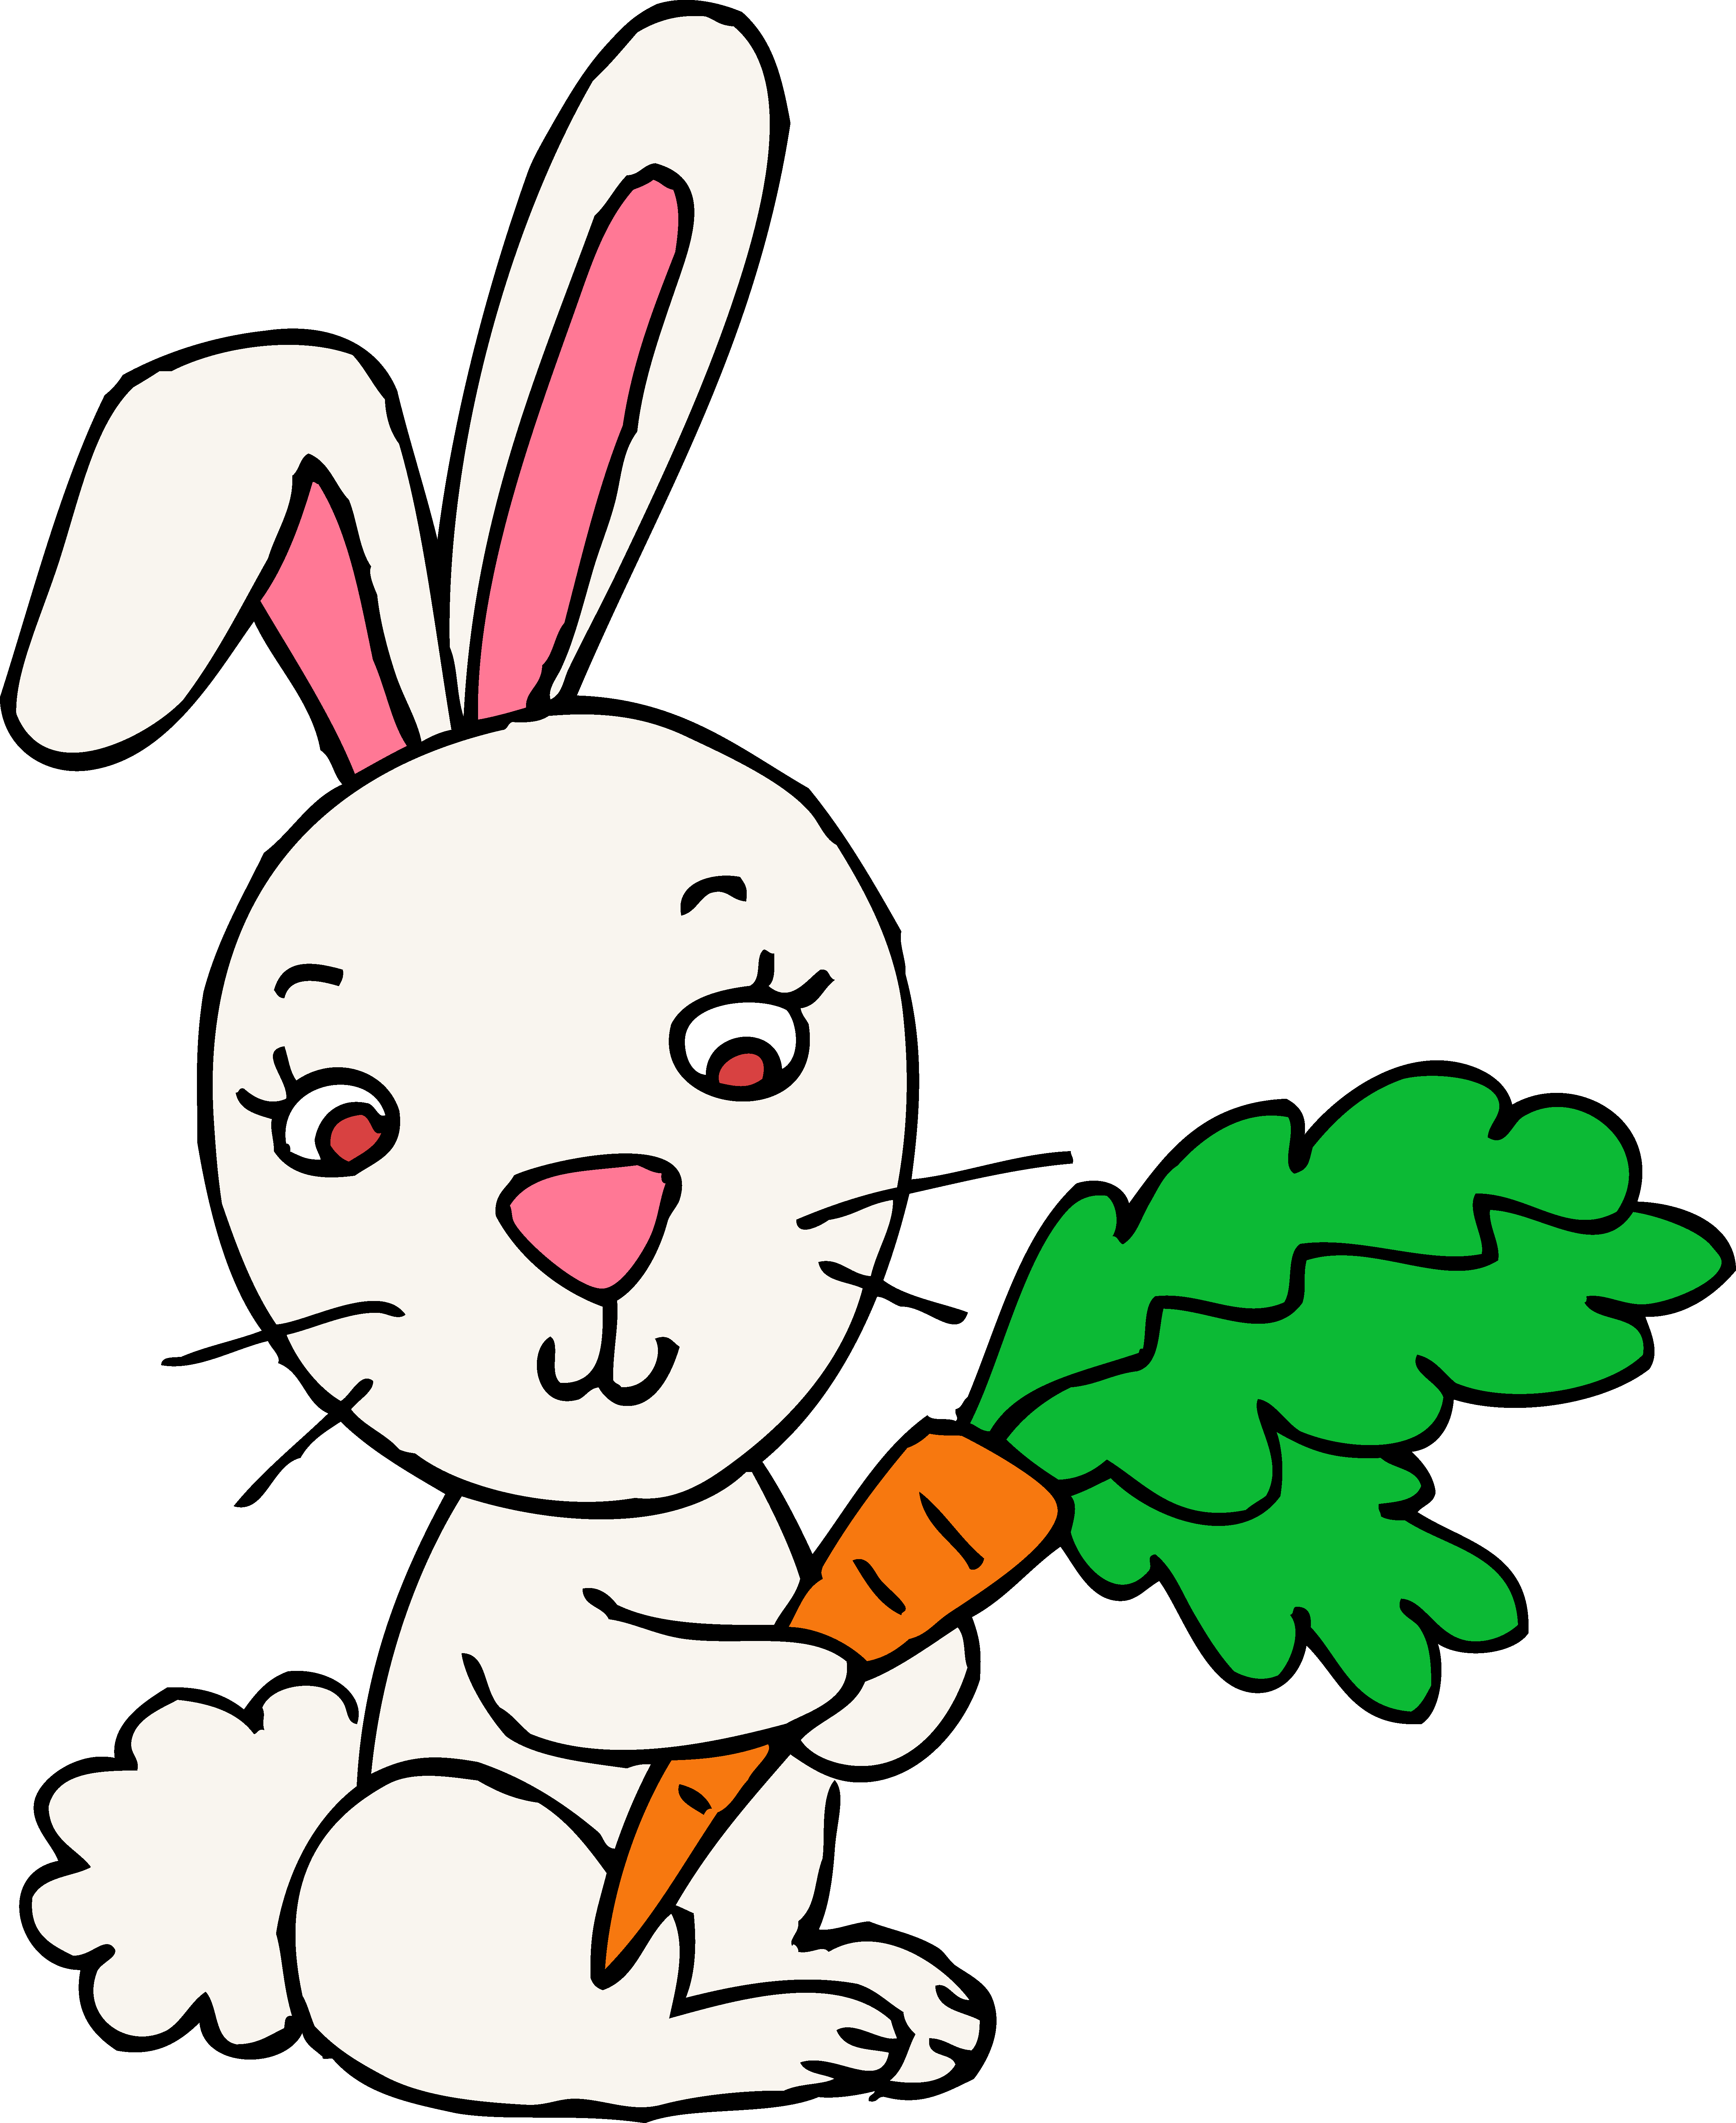 Rabbit and bunny clipart